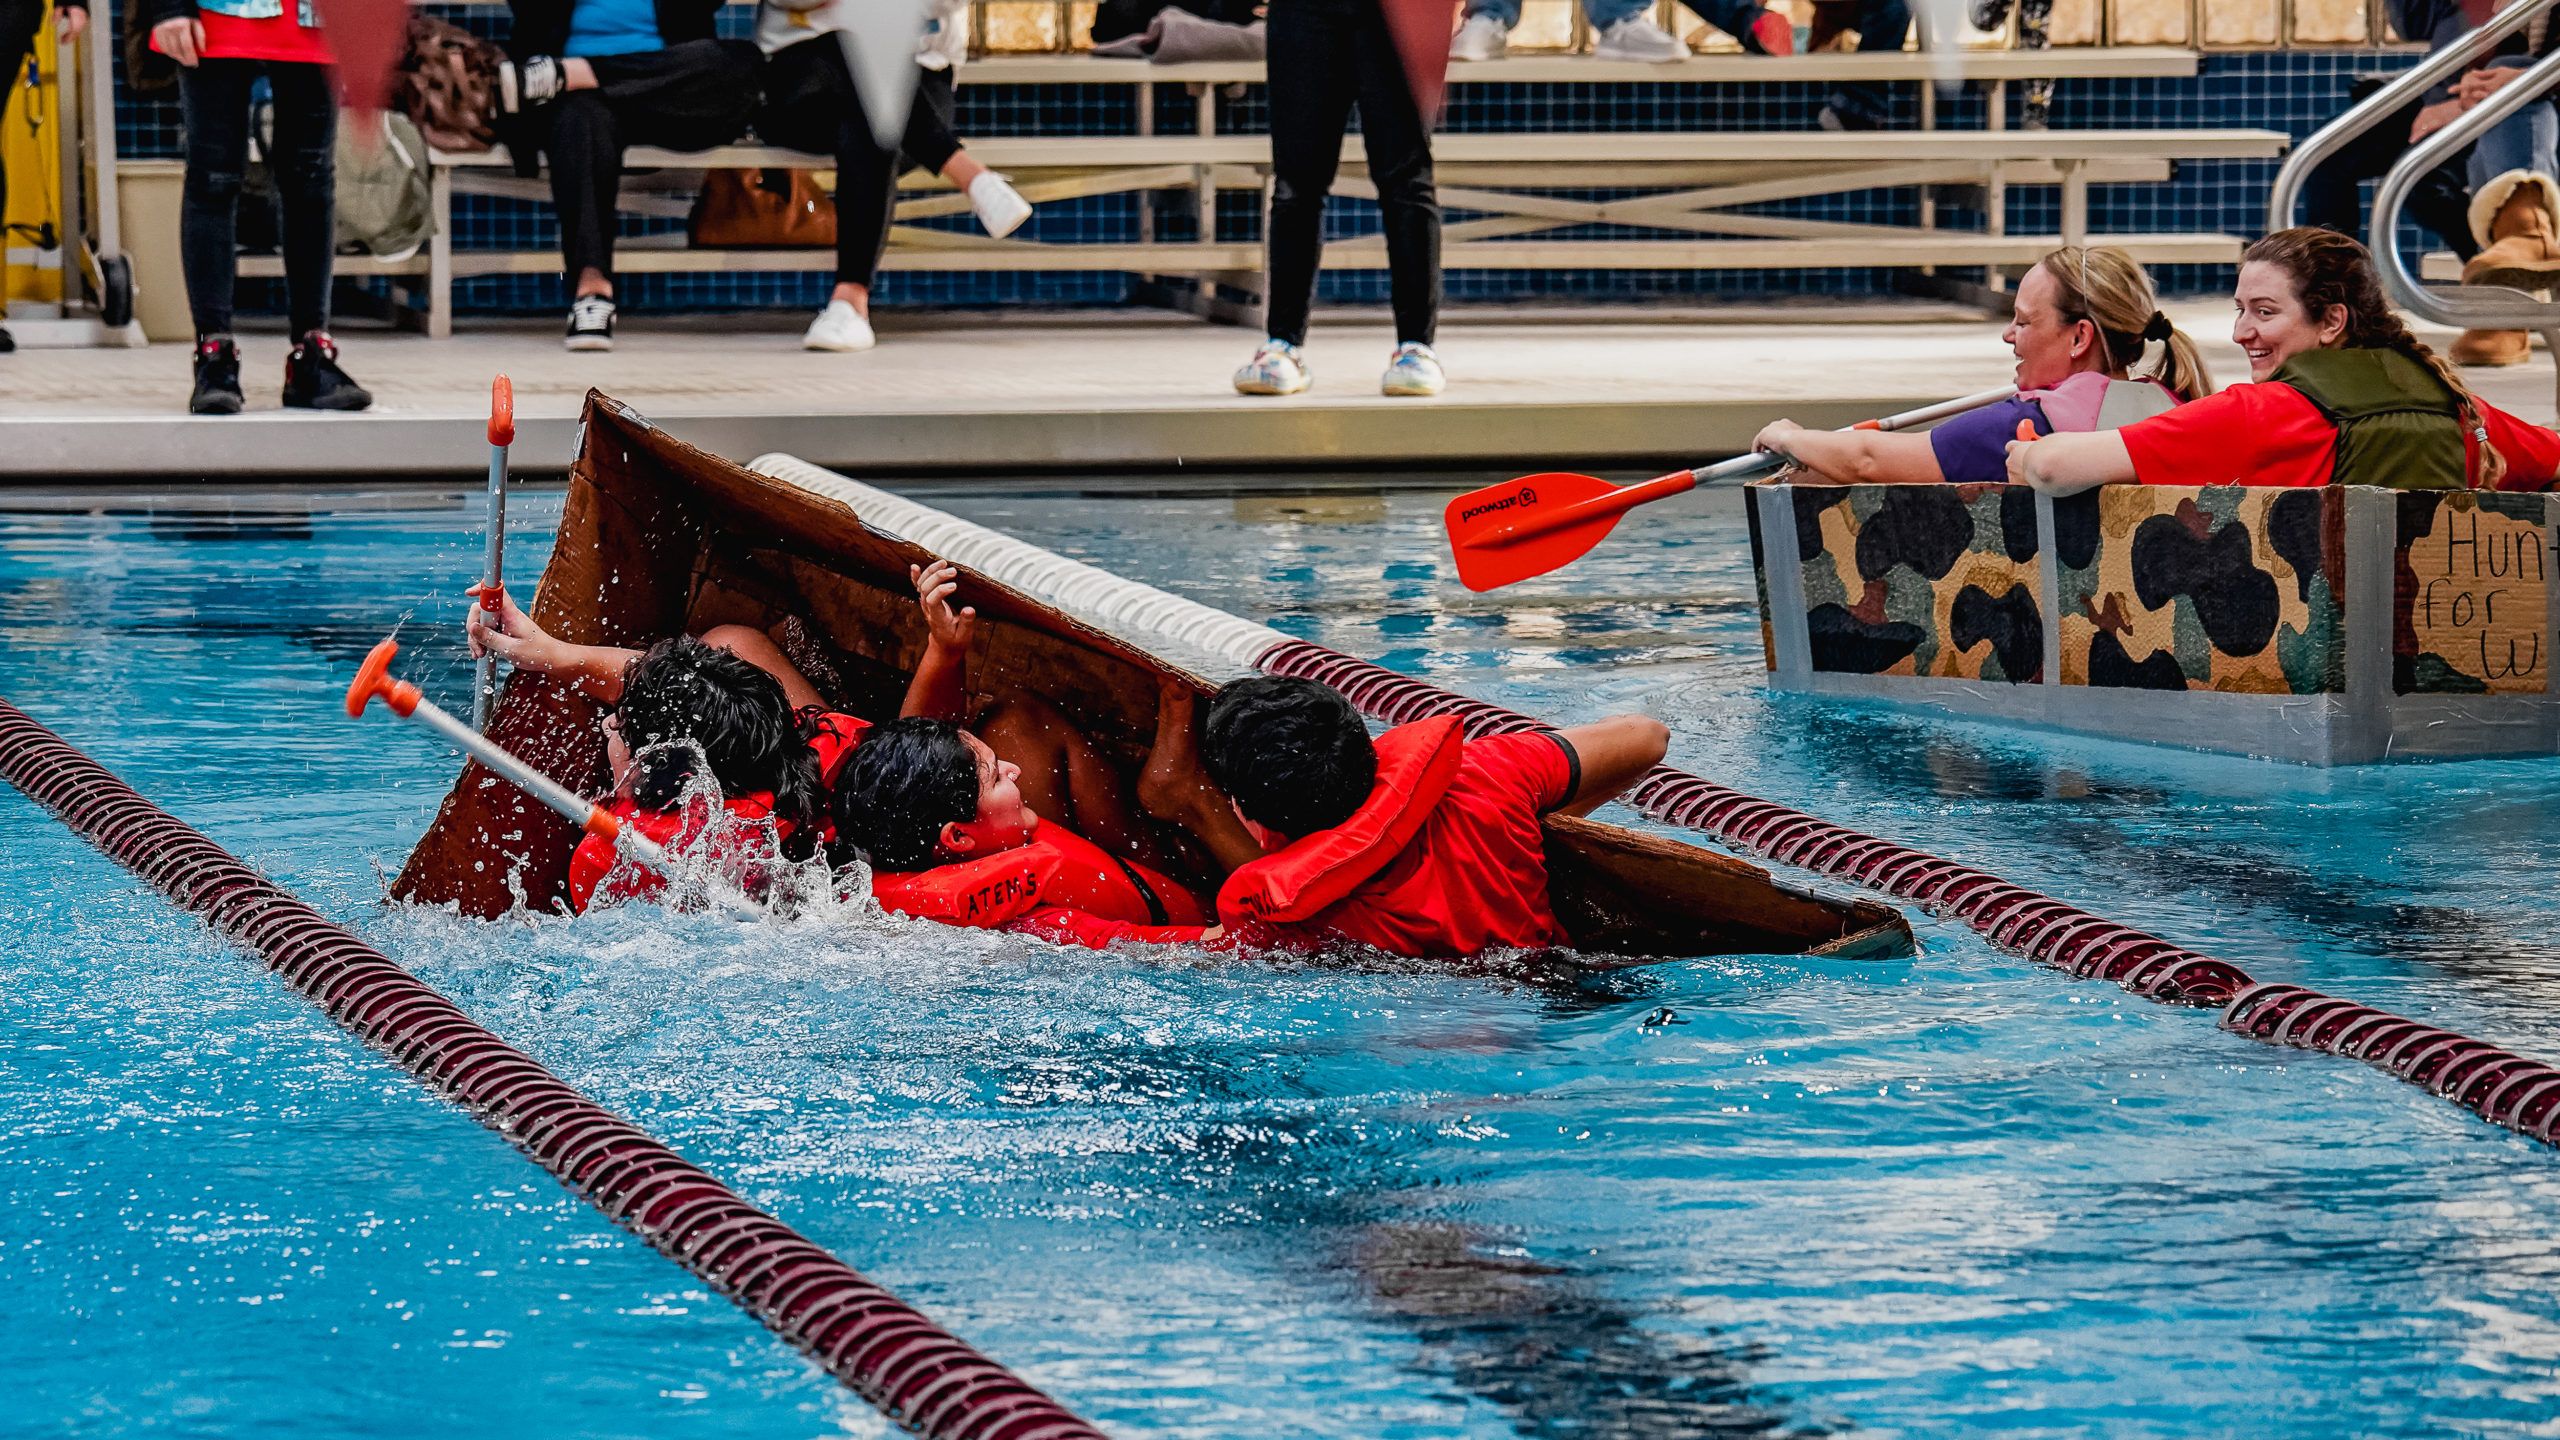 What happens when architects design cardboard boats? - Elevatus